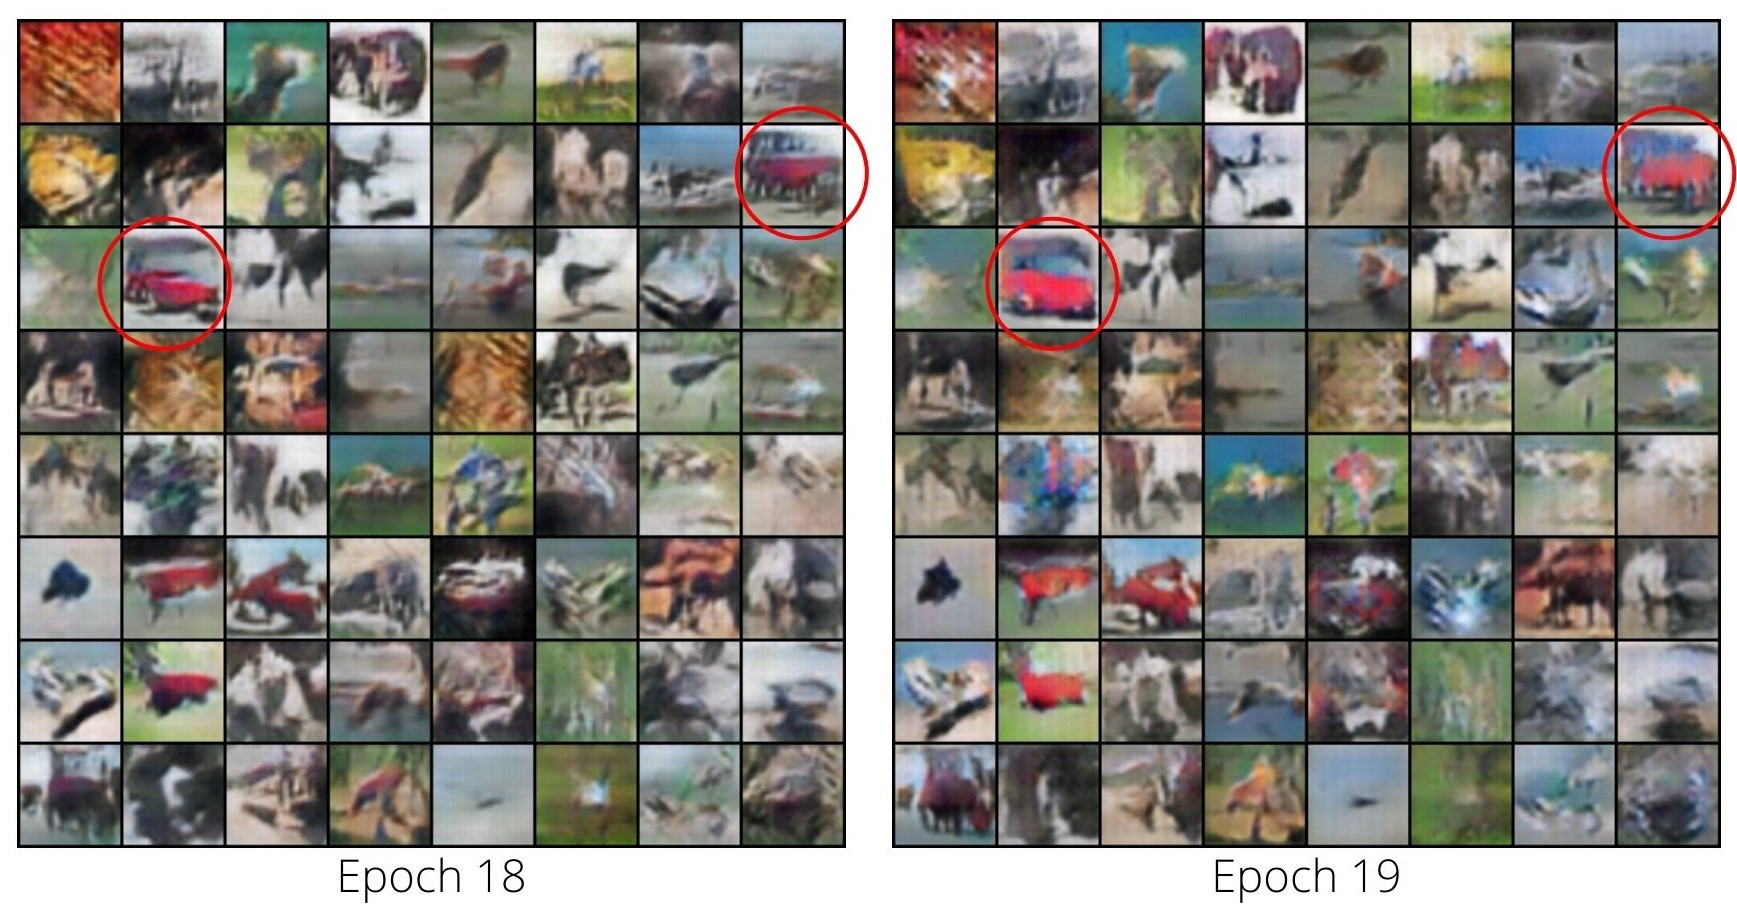 Images generated by the generator network after epoch 18 and epoch 19.